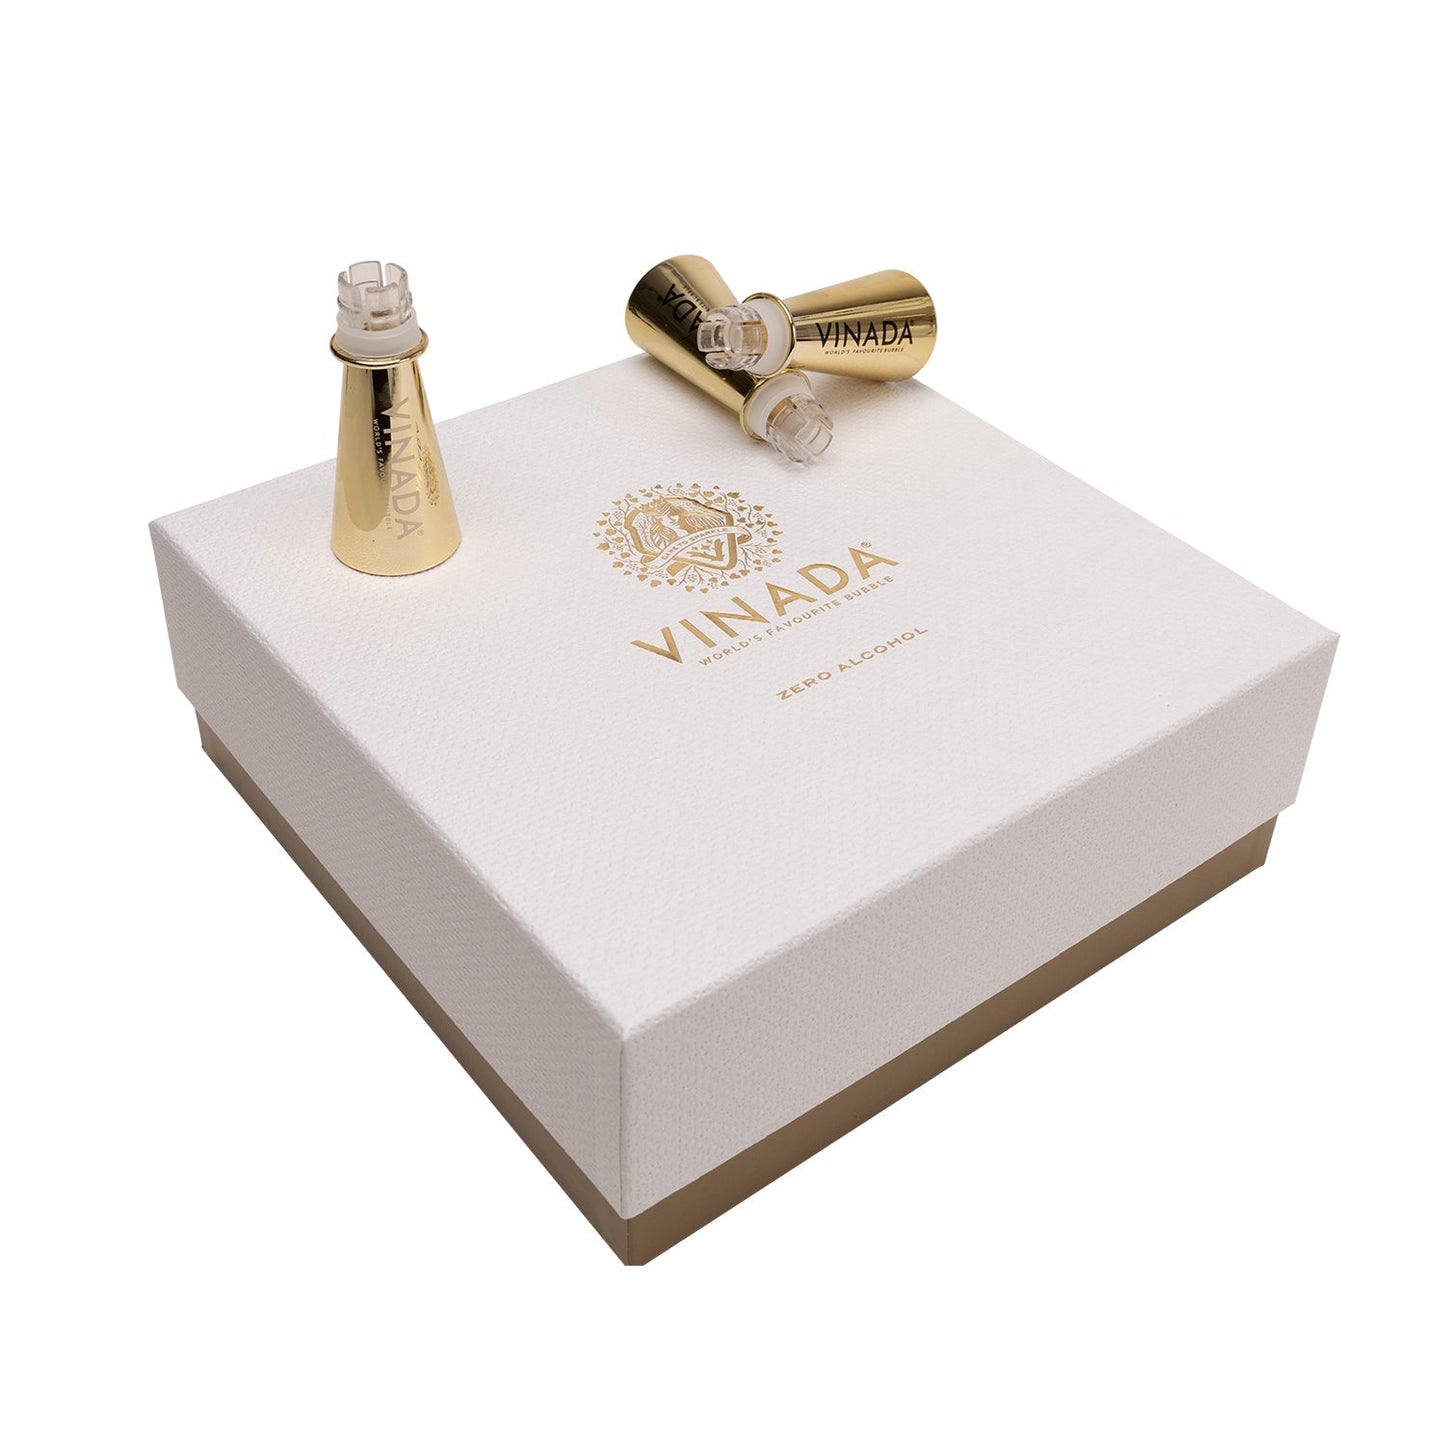 VINADA® - FULL EXPERIENCE GIFT BOX - 200ML Bottles (3) + 3 Sippers